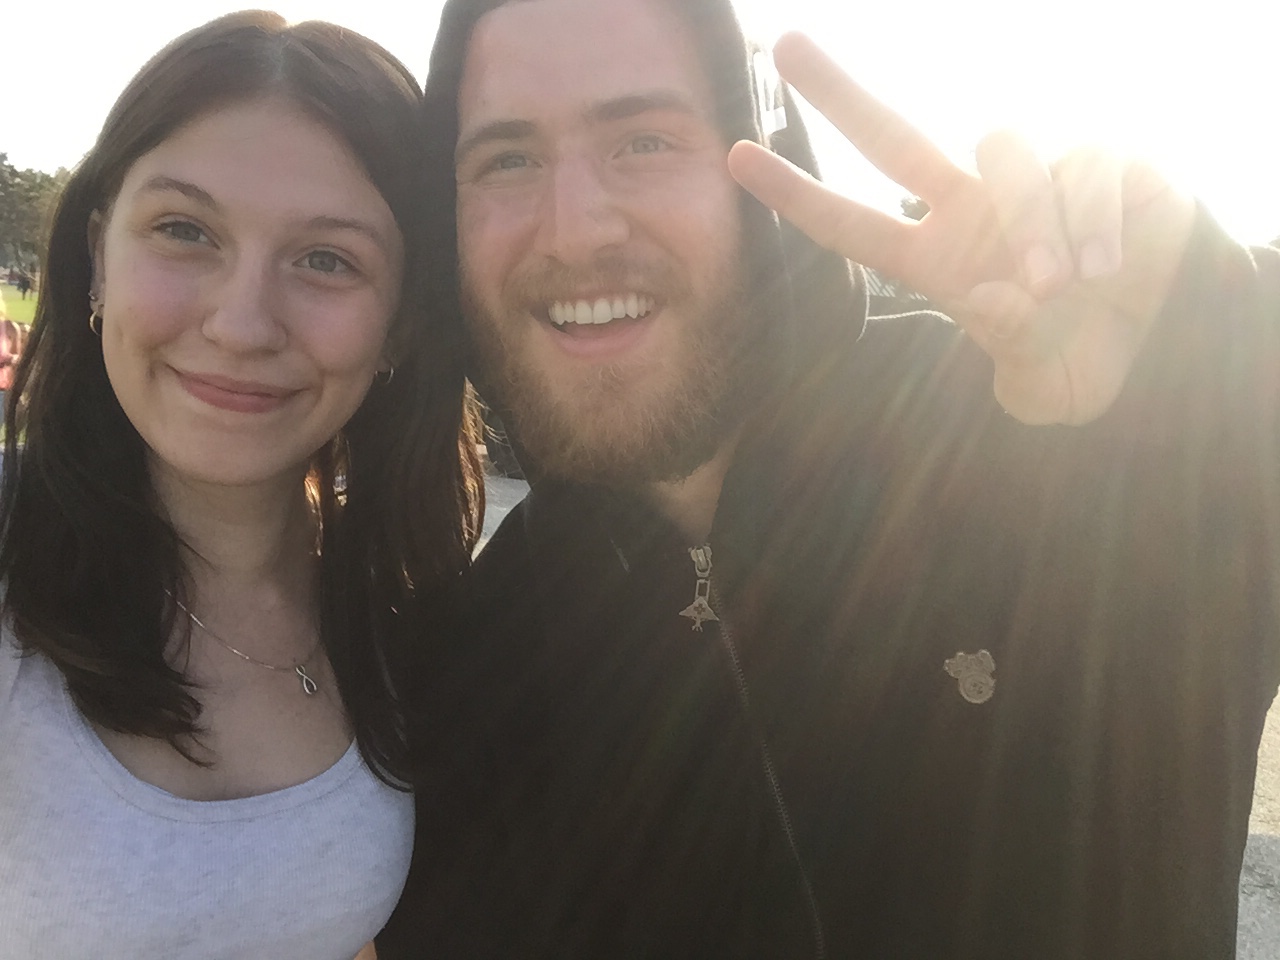 Mike Posner at Edgewater Park in Cleveland, OH July 6, 2015
thestruggletosmile.tumblr.com
